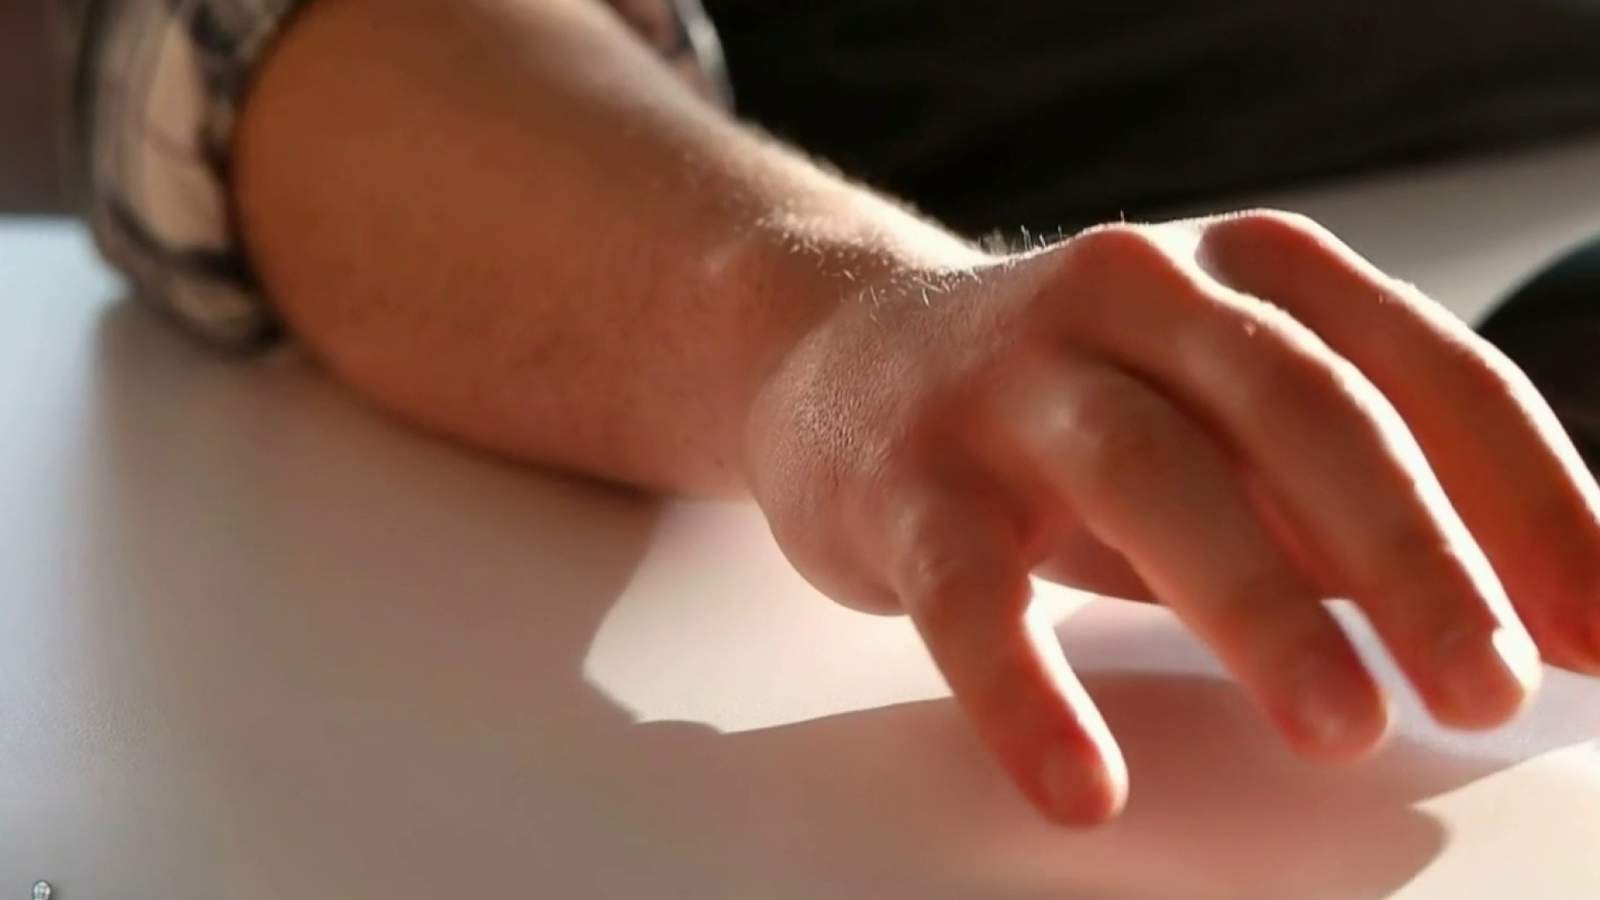 How long does COVID-19 survive on skin? New study shows the importance of hand washing